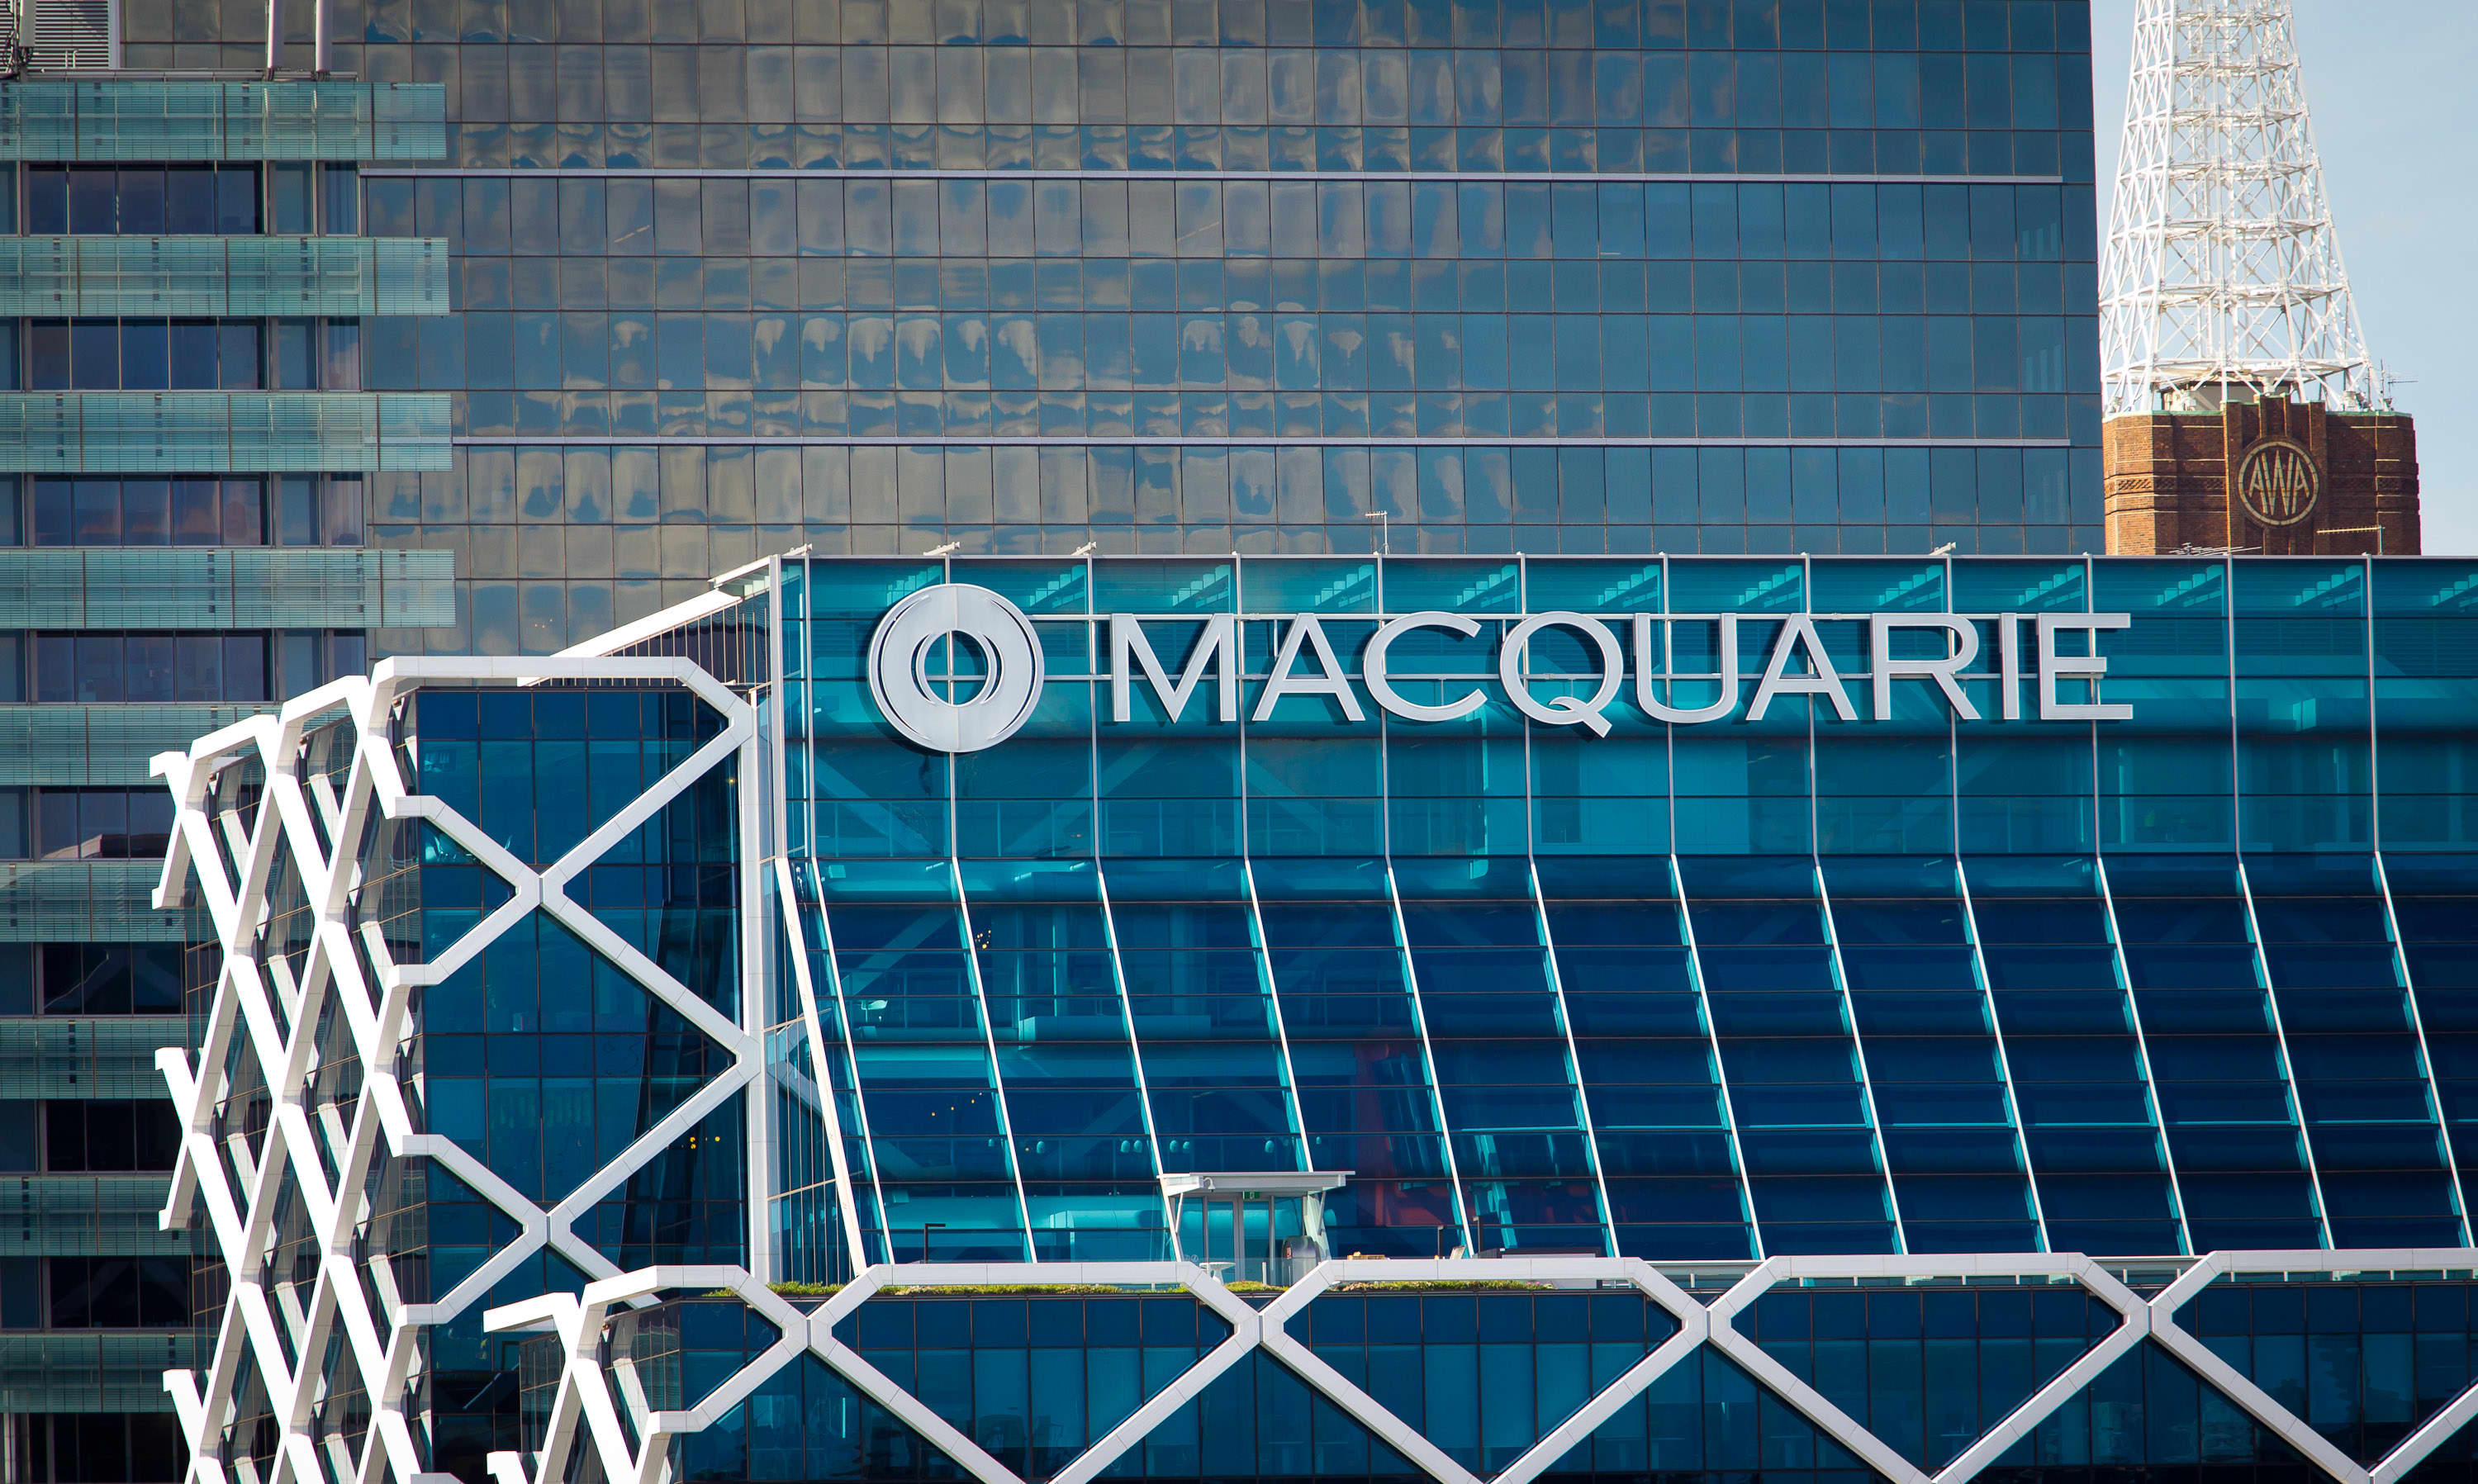 Australia's Macquarie to buy Waddell & Reed Financial for $1.7 billion